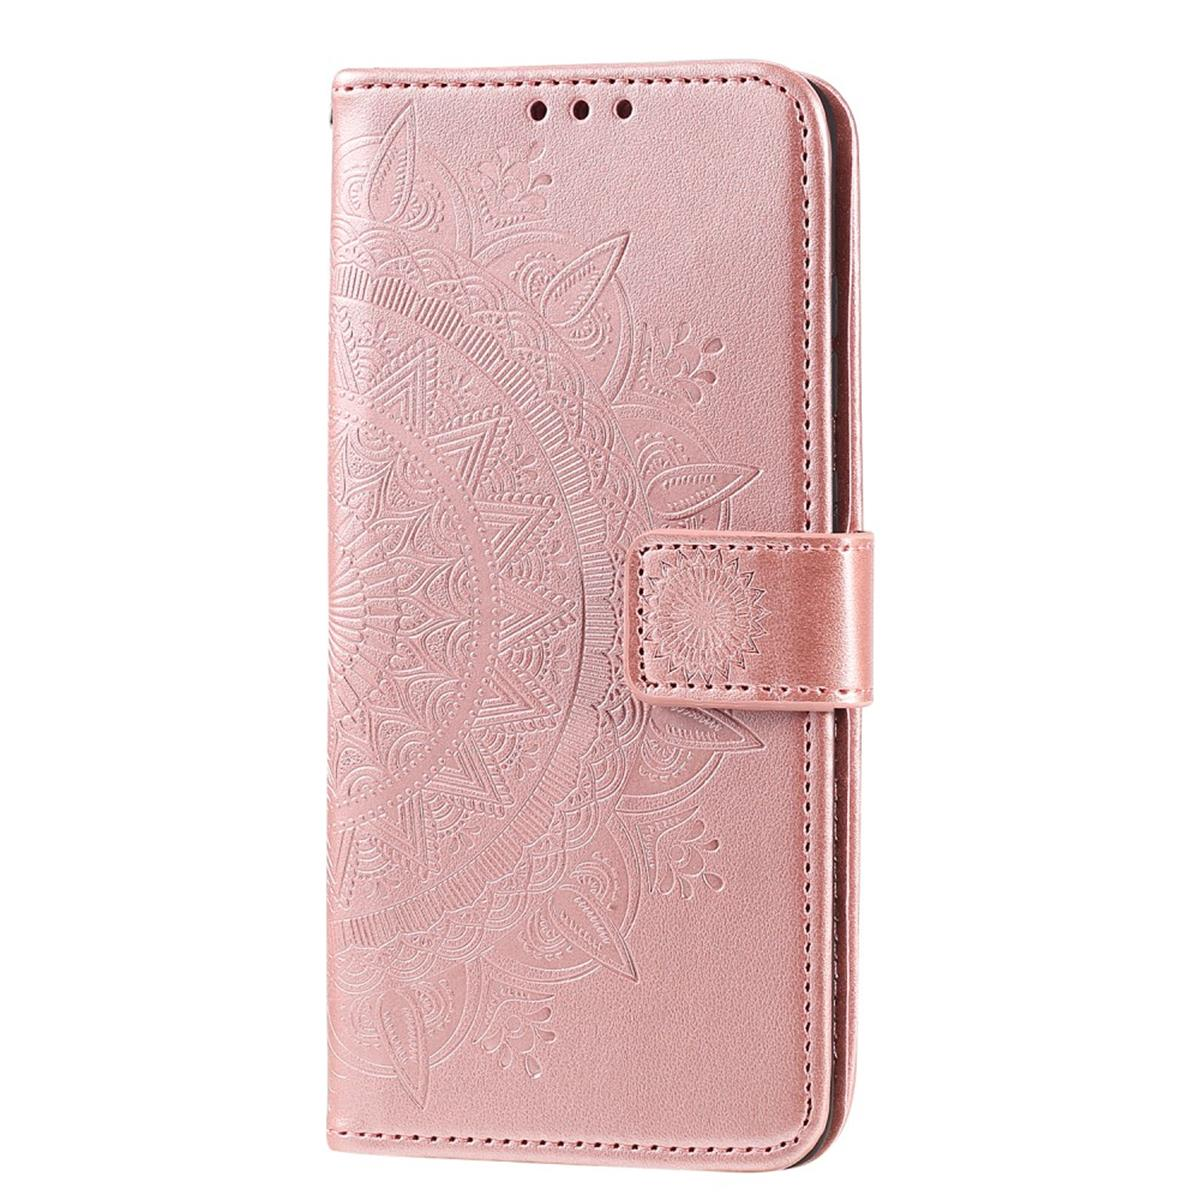 COVERKINGZ Klapphülle mit Mandala Muster, Roségold Samsung, A31, Galaxy Bookcover